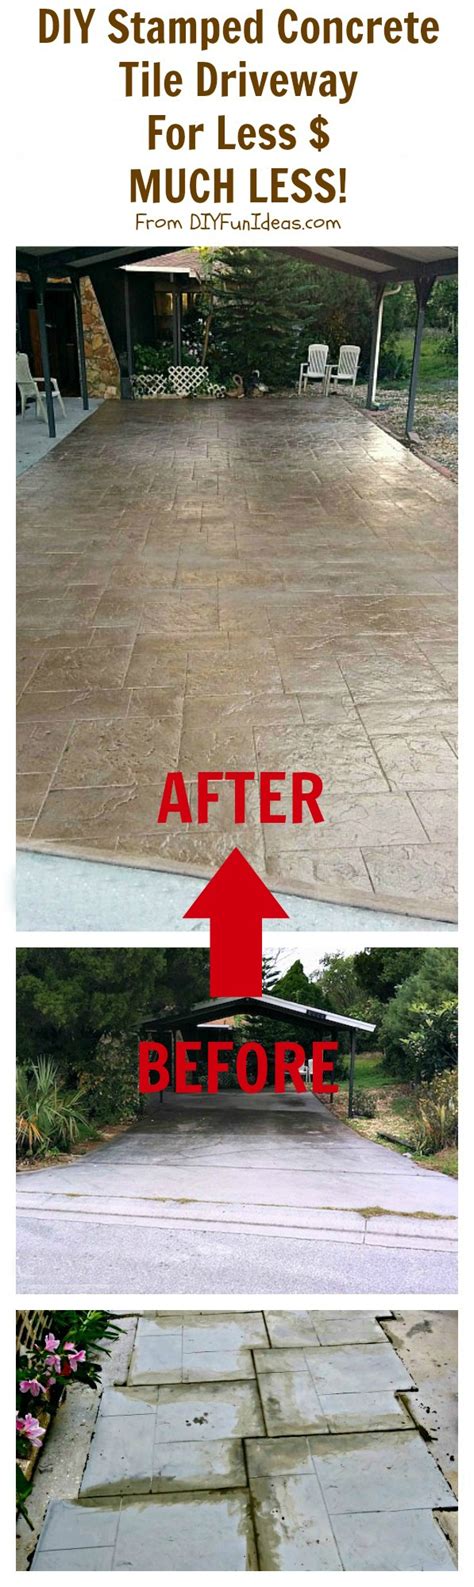 See more ideas about diy stamped concrete, stamped concrete, concrete resurfacing. GORGEOUS DIY STAMPED CONCRETE TILE DRIVEWAY FOR LESS $...MUCH LESS!!! - Do-It-Yourself Fun Ideas